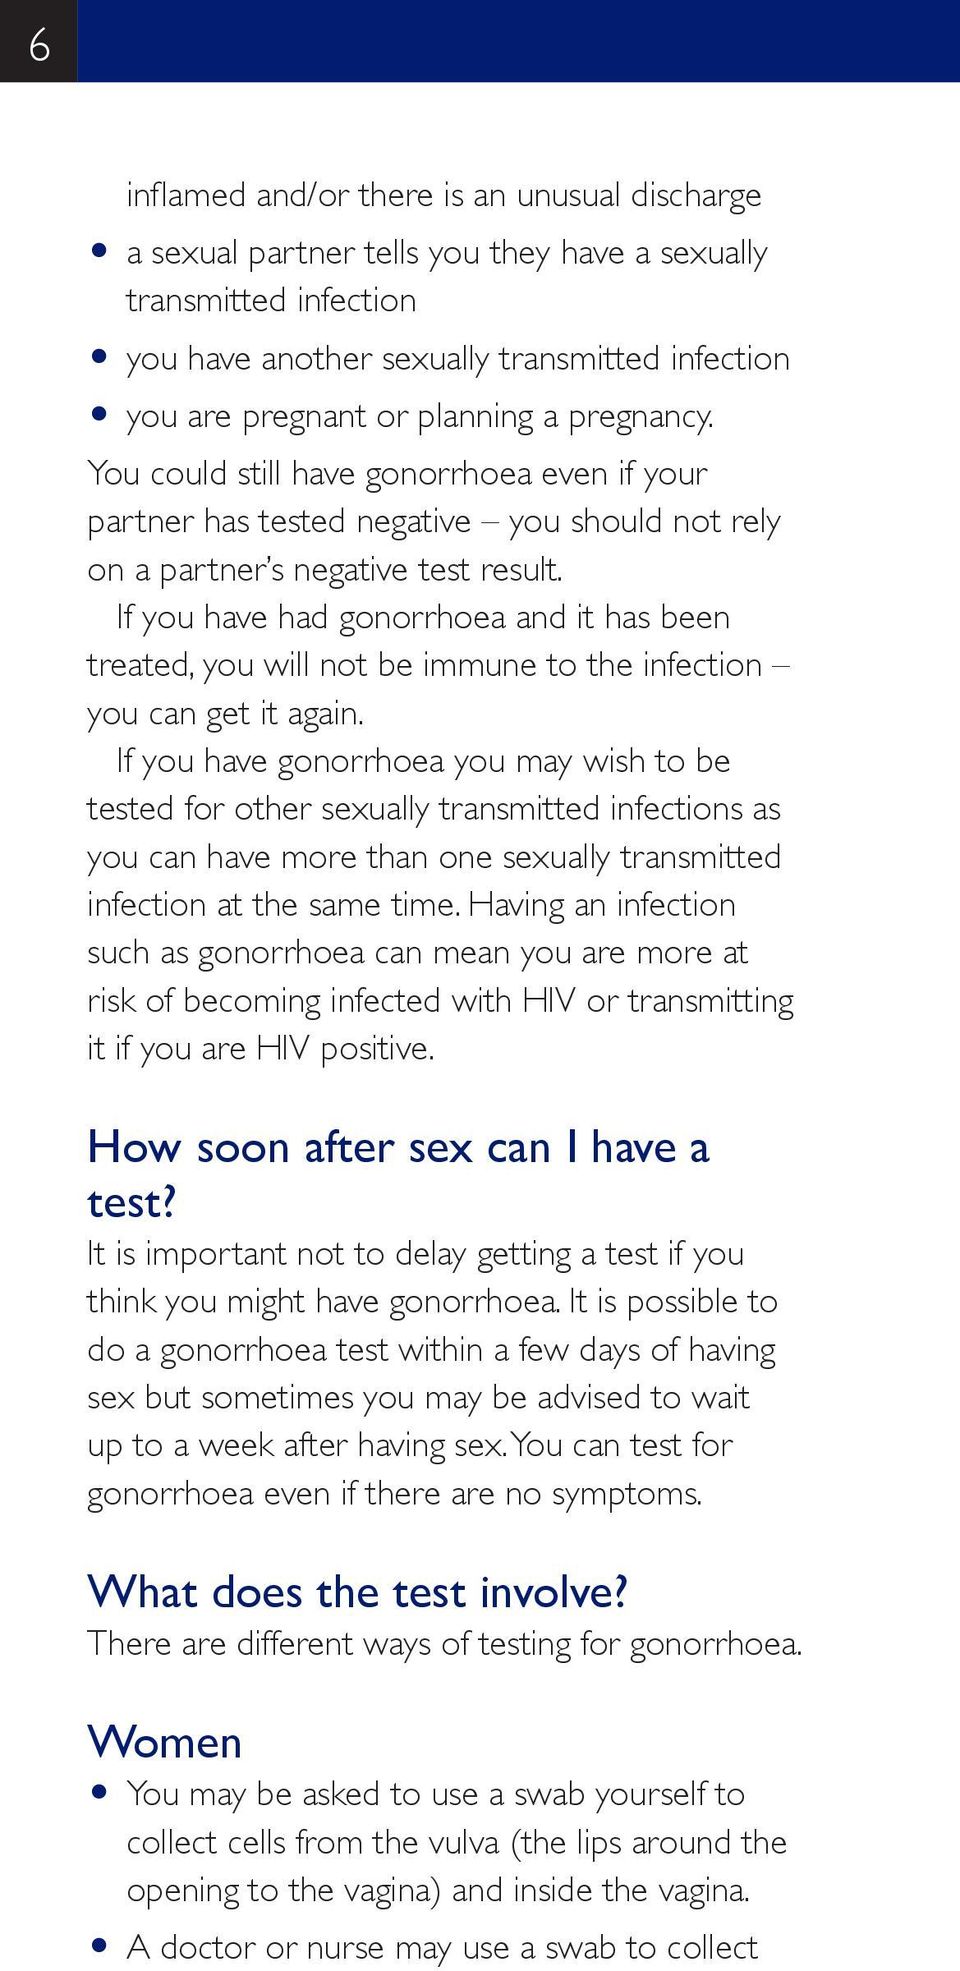 If you have had gonorrhoea and it has been treated, you will not be immune to the infection you can get it again.